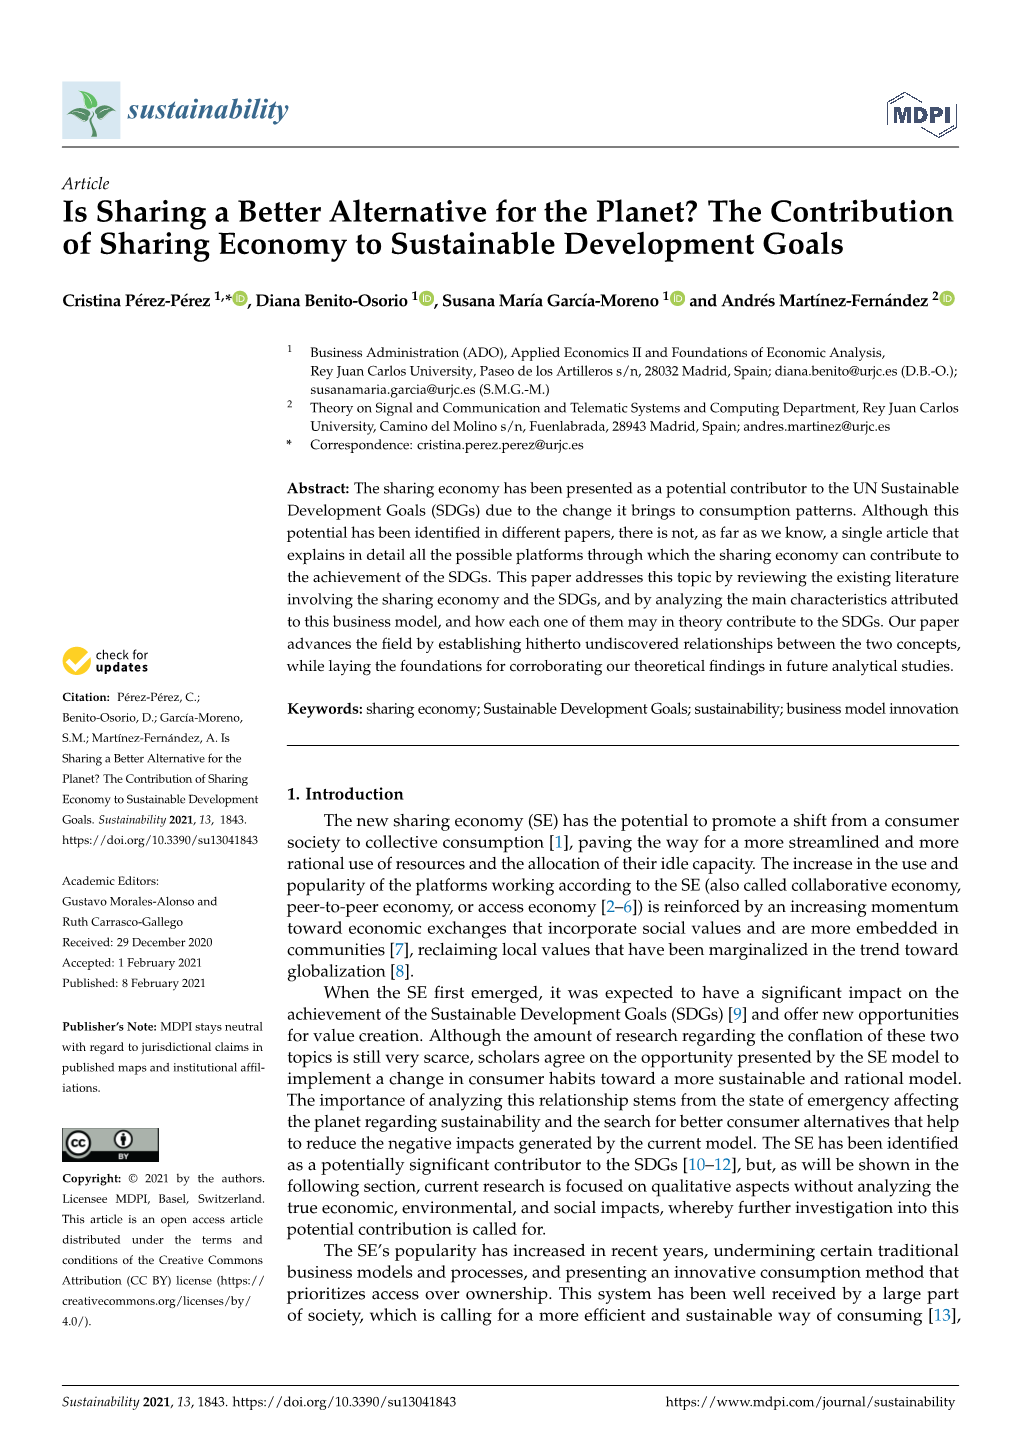 The Contribution of Sharing Economy to Sustainable Development Goals